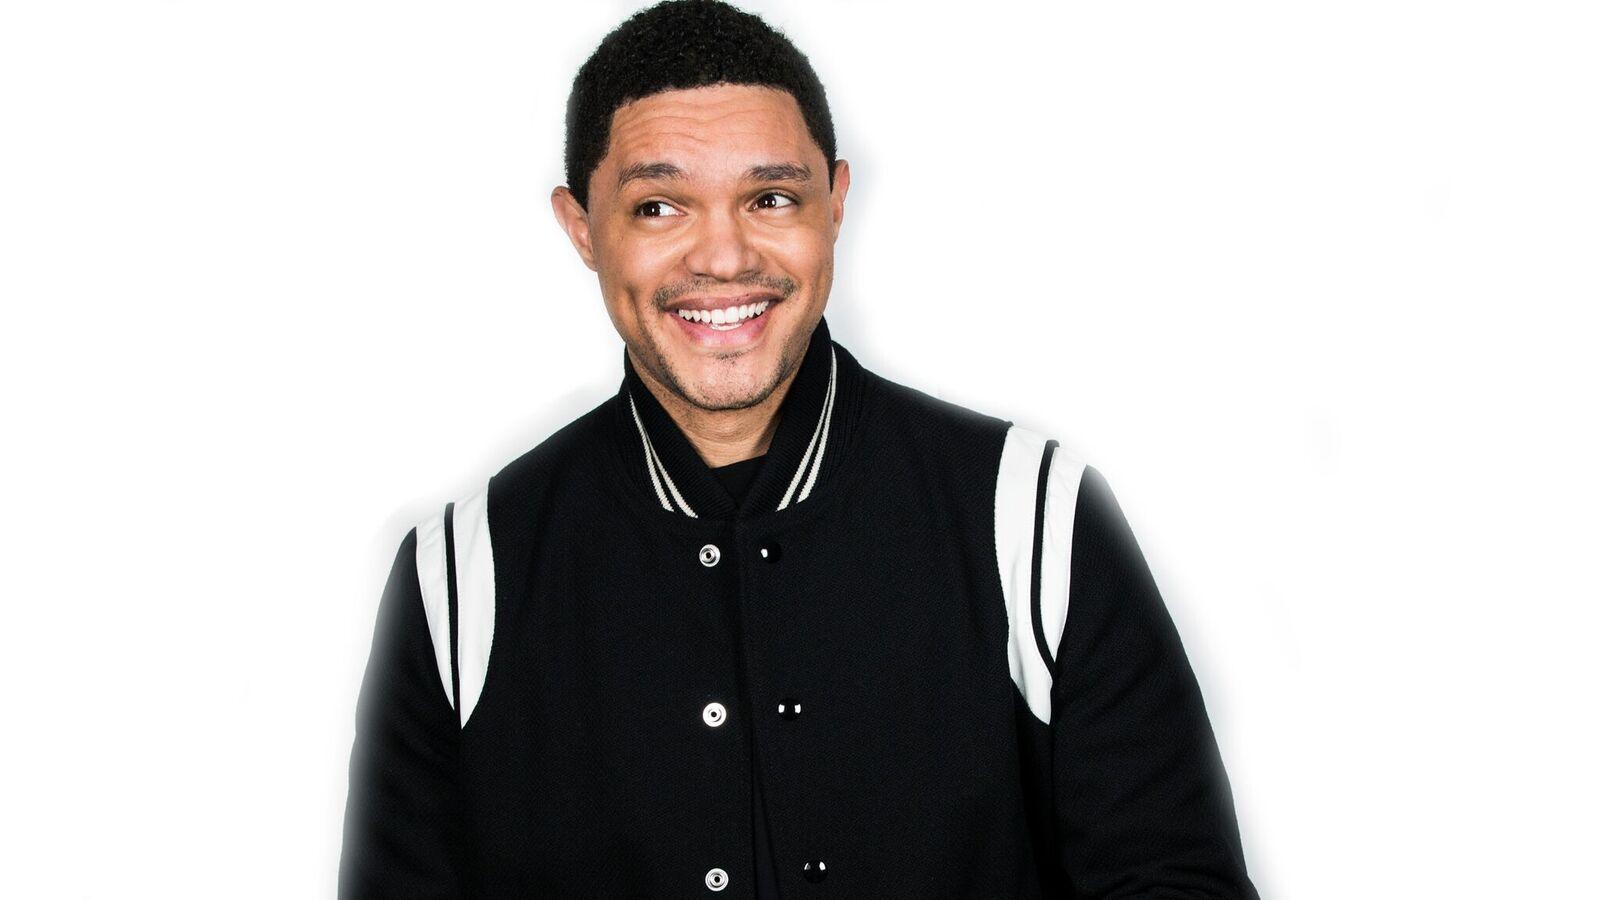 Daily Show host Trevor Noah coming to the Walmart AMP in 2019